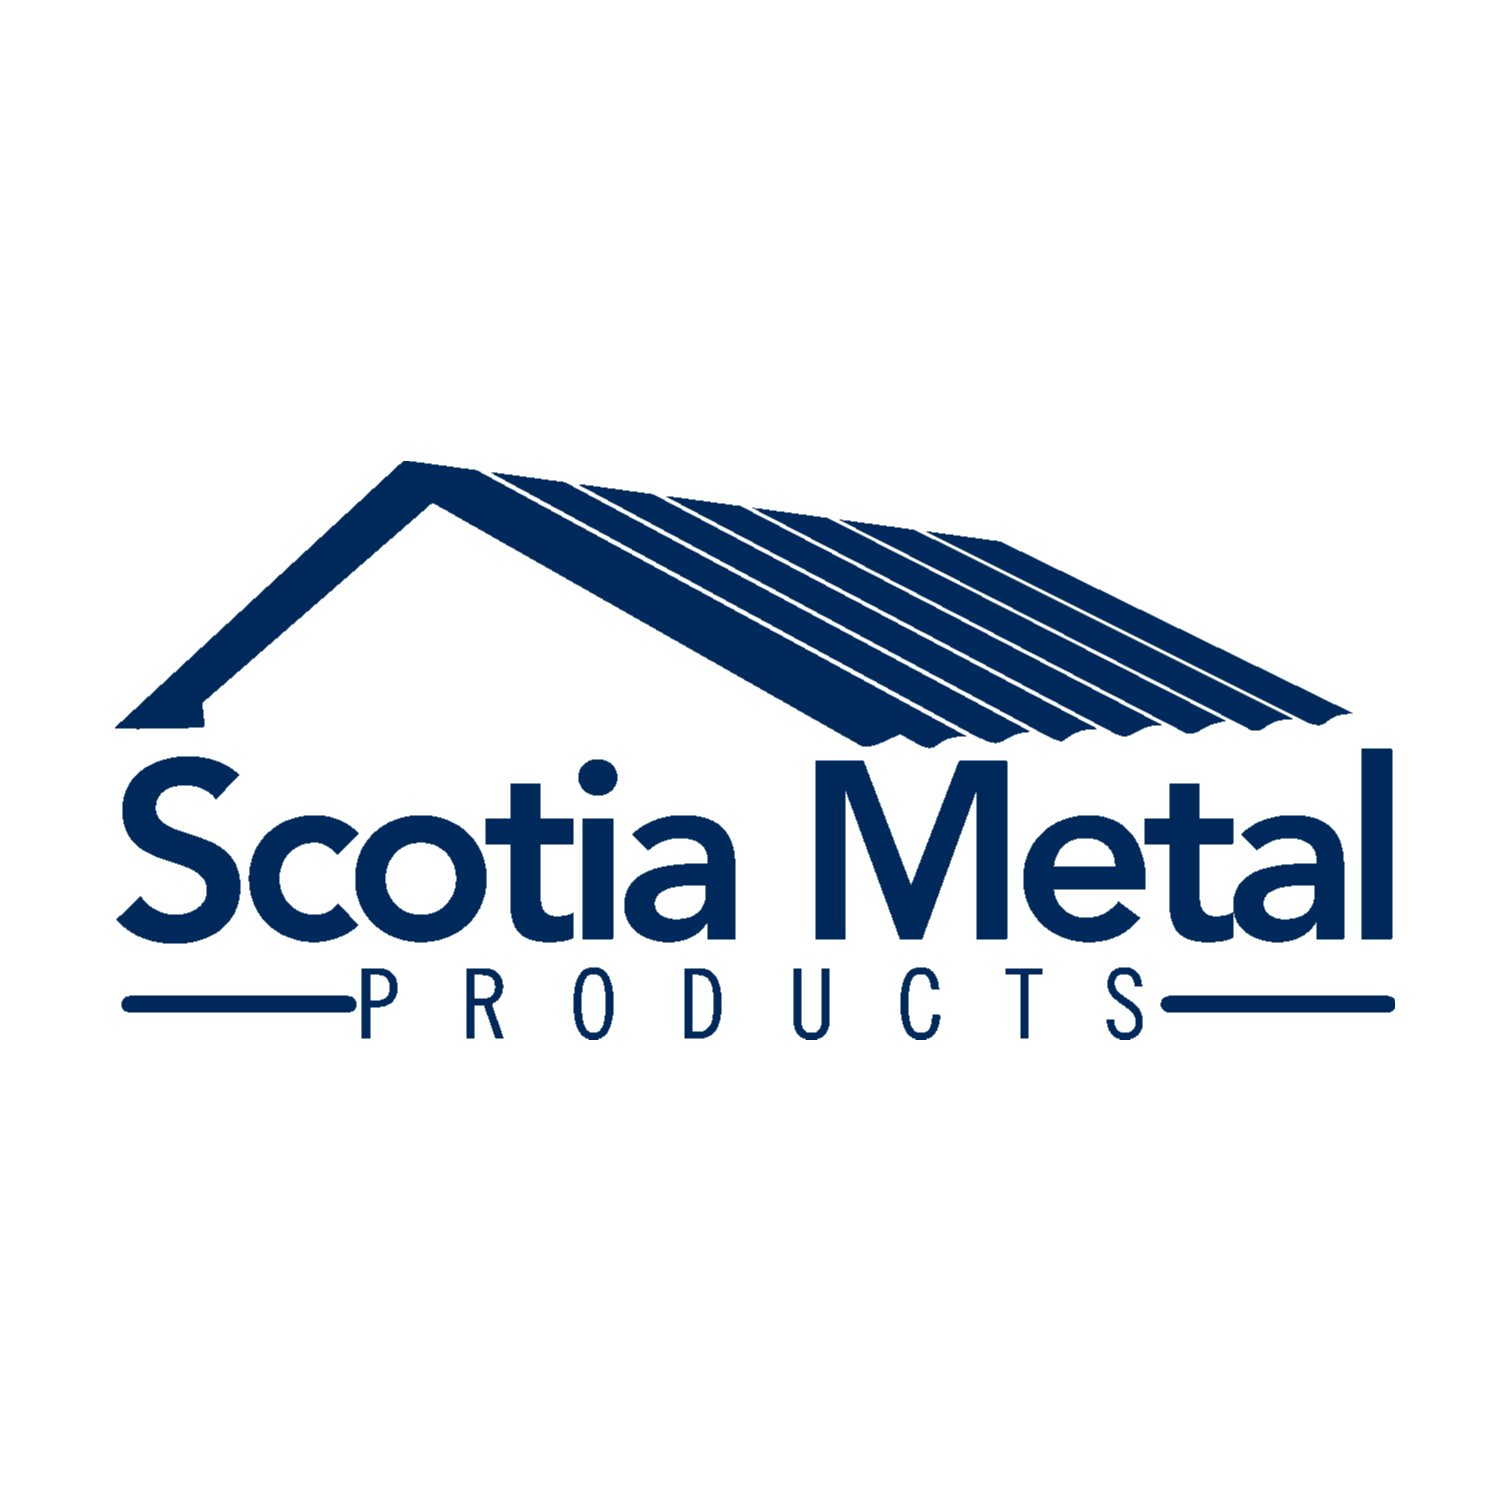 <p><span style="color: black;">Scotia Metal Products</span></p> logo